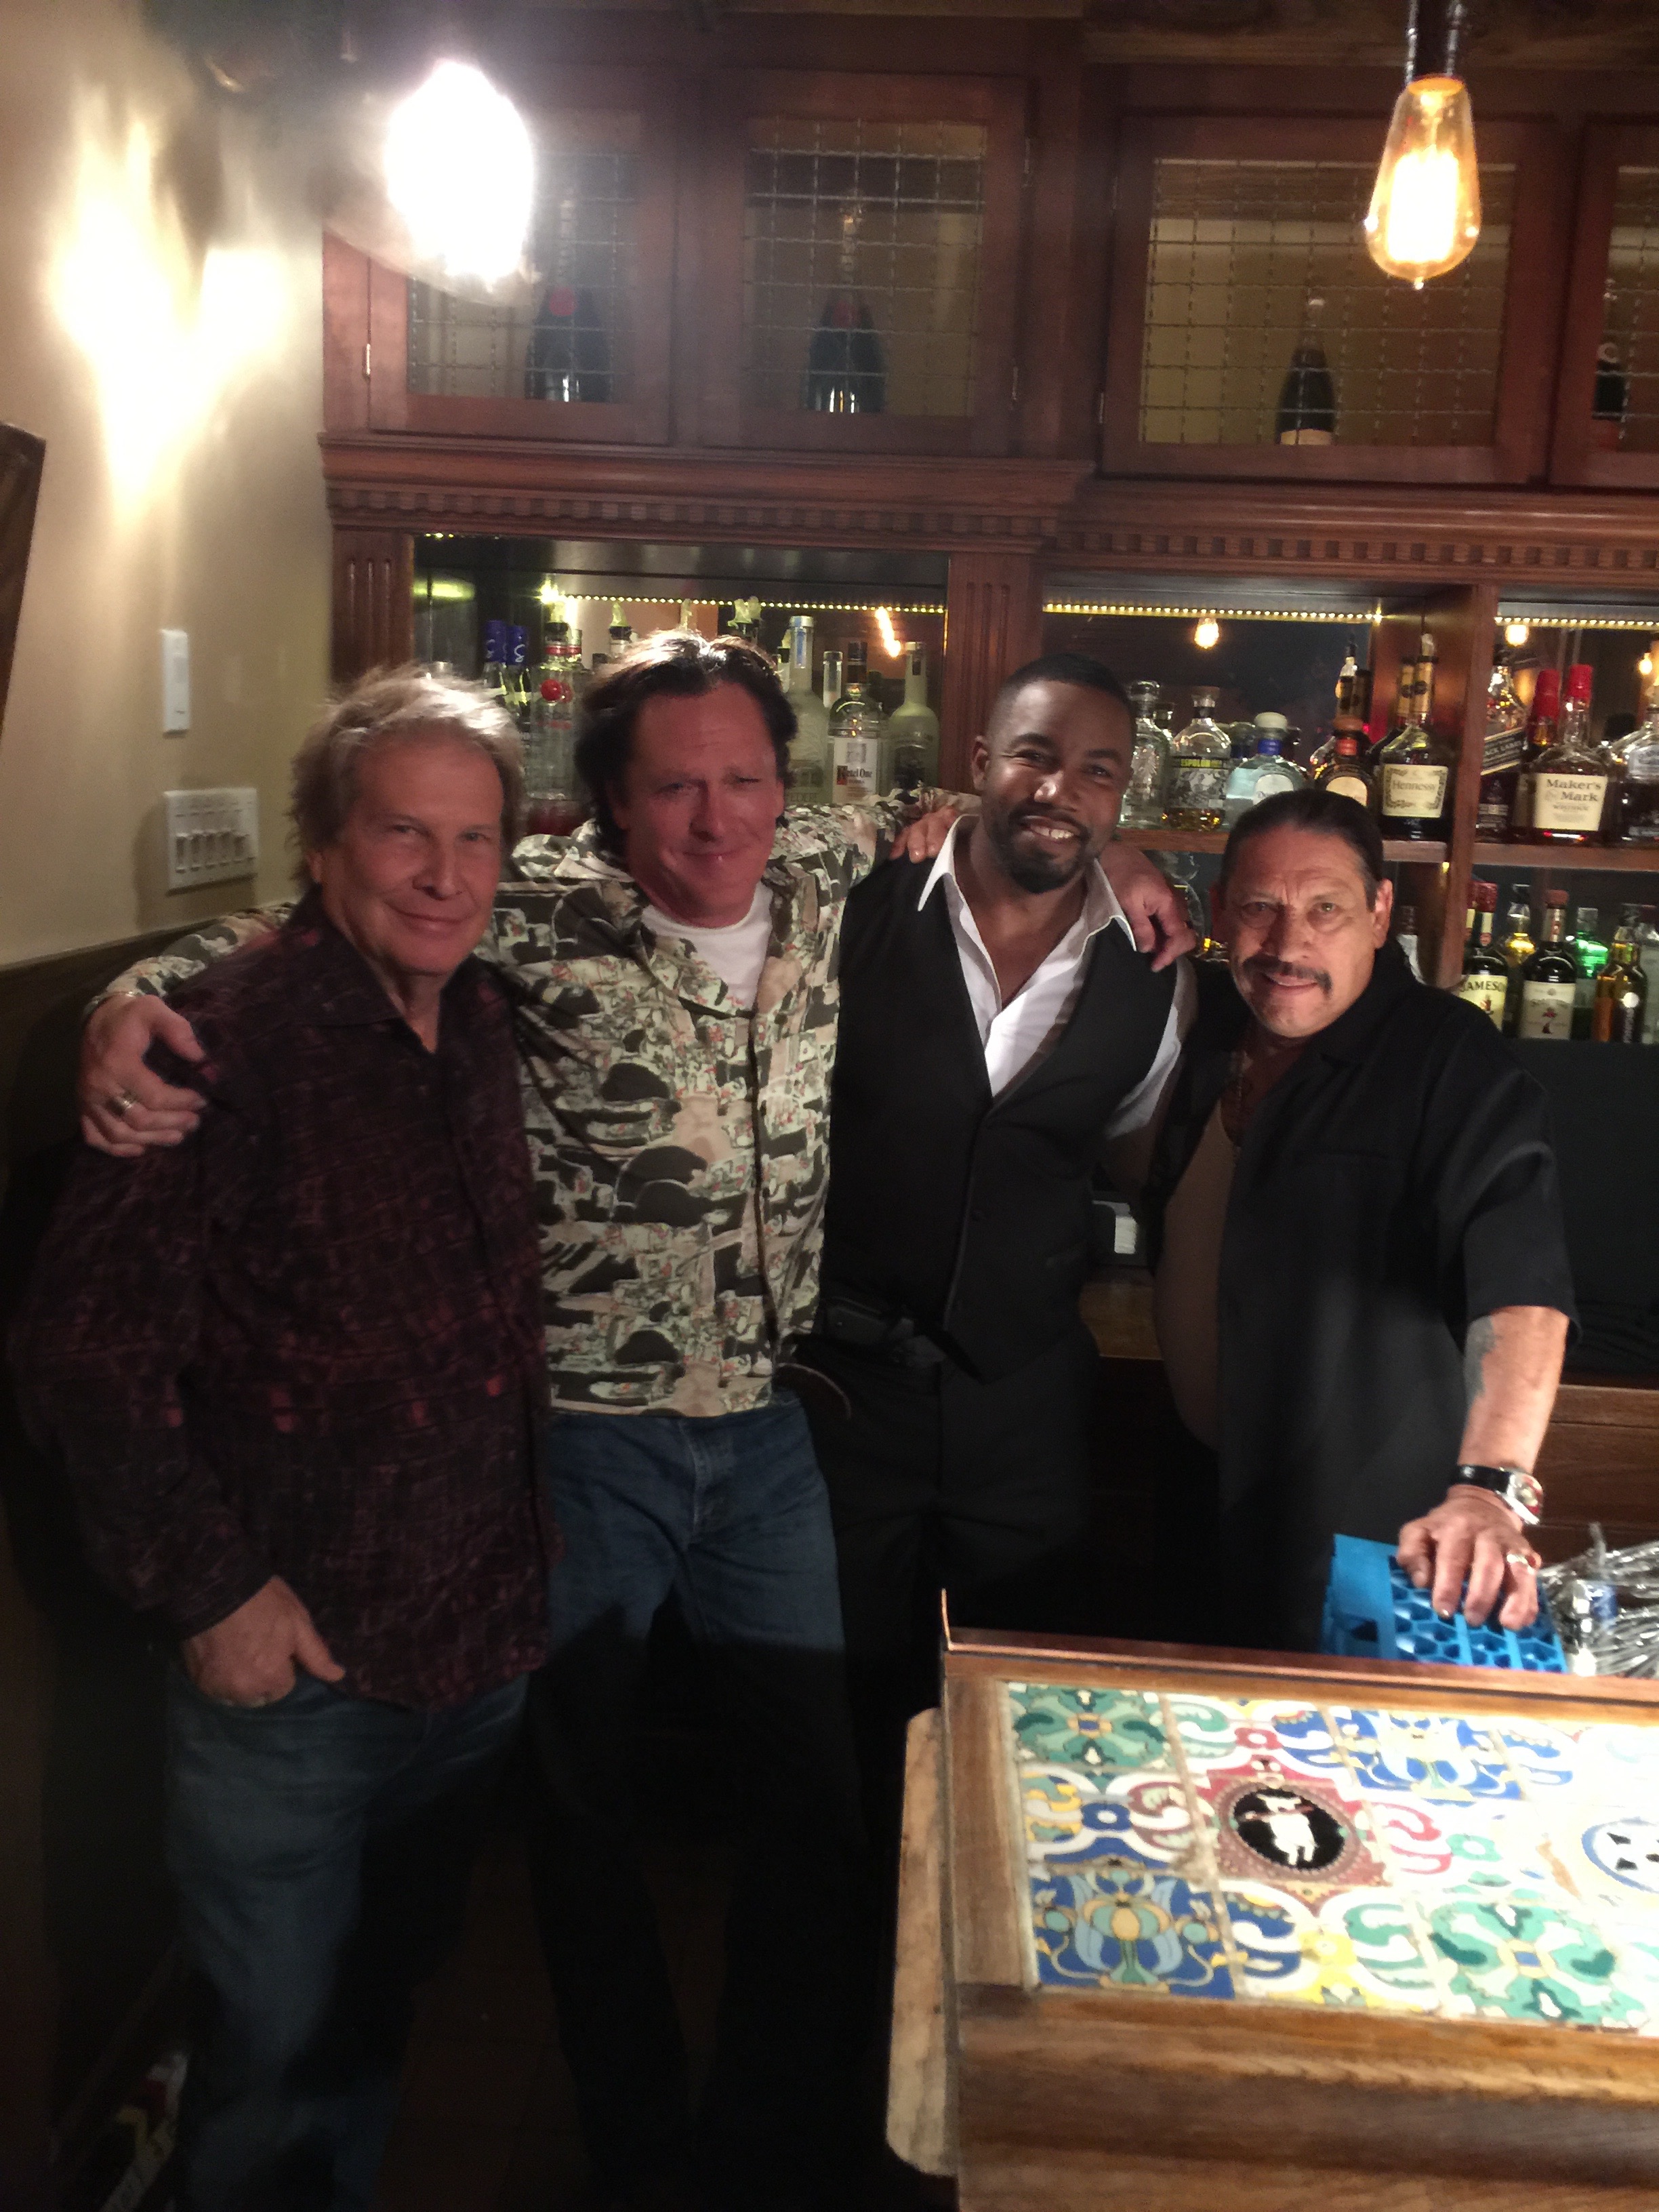 Wrap for the final shooting Vigilante Diaries with our stars Michael Madsen, Jai Michael White and Danny Trejo